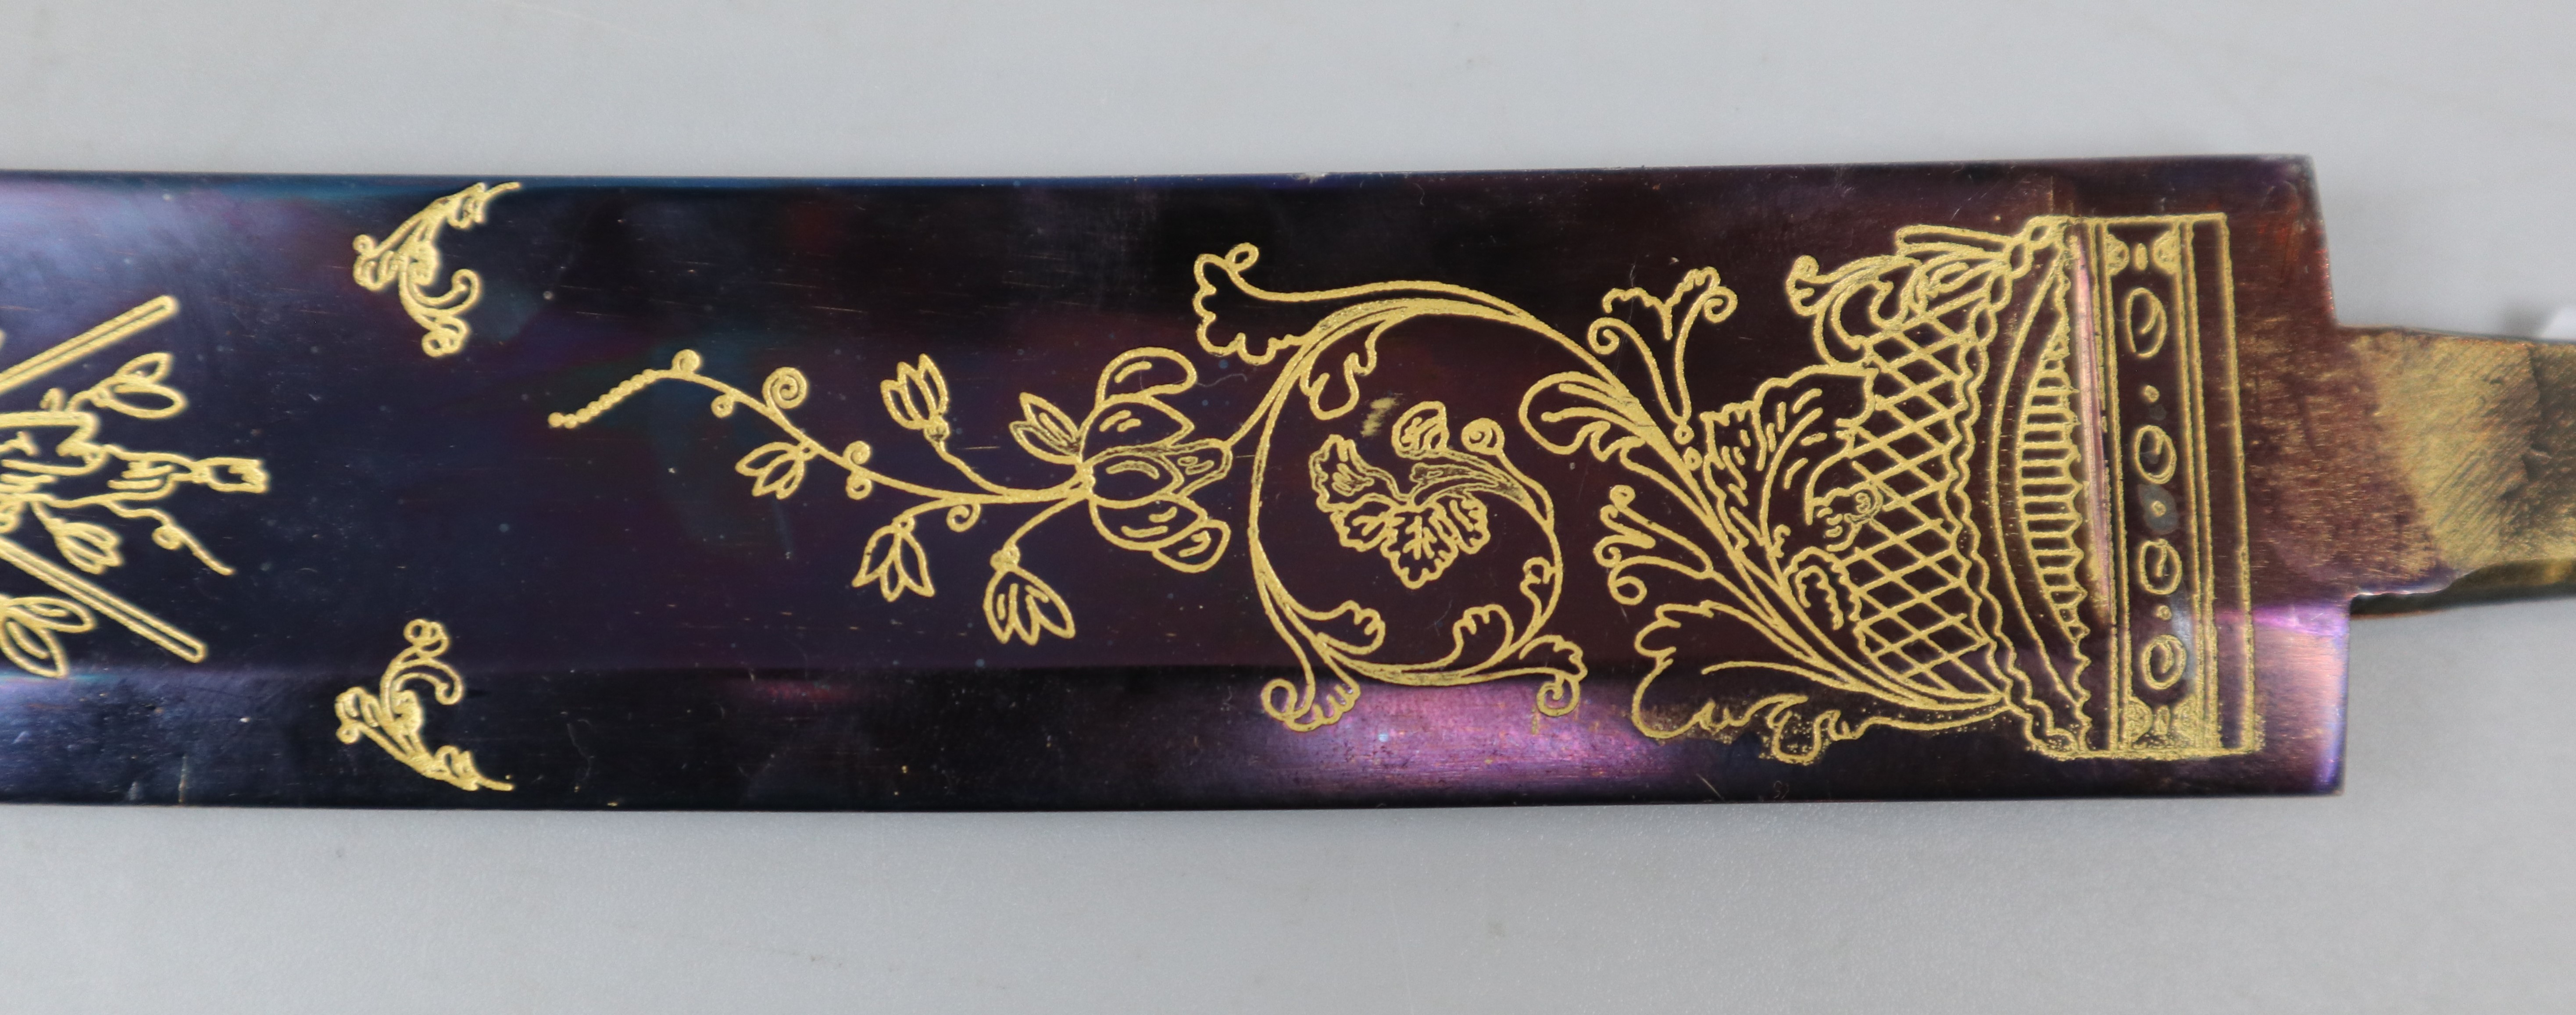 Craig & Co curved and decorated sword blade - Image 7 of 7